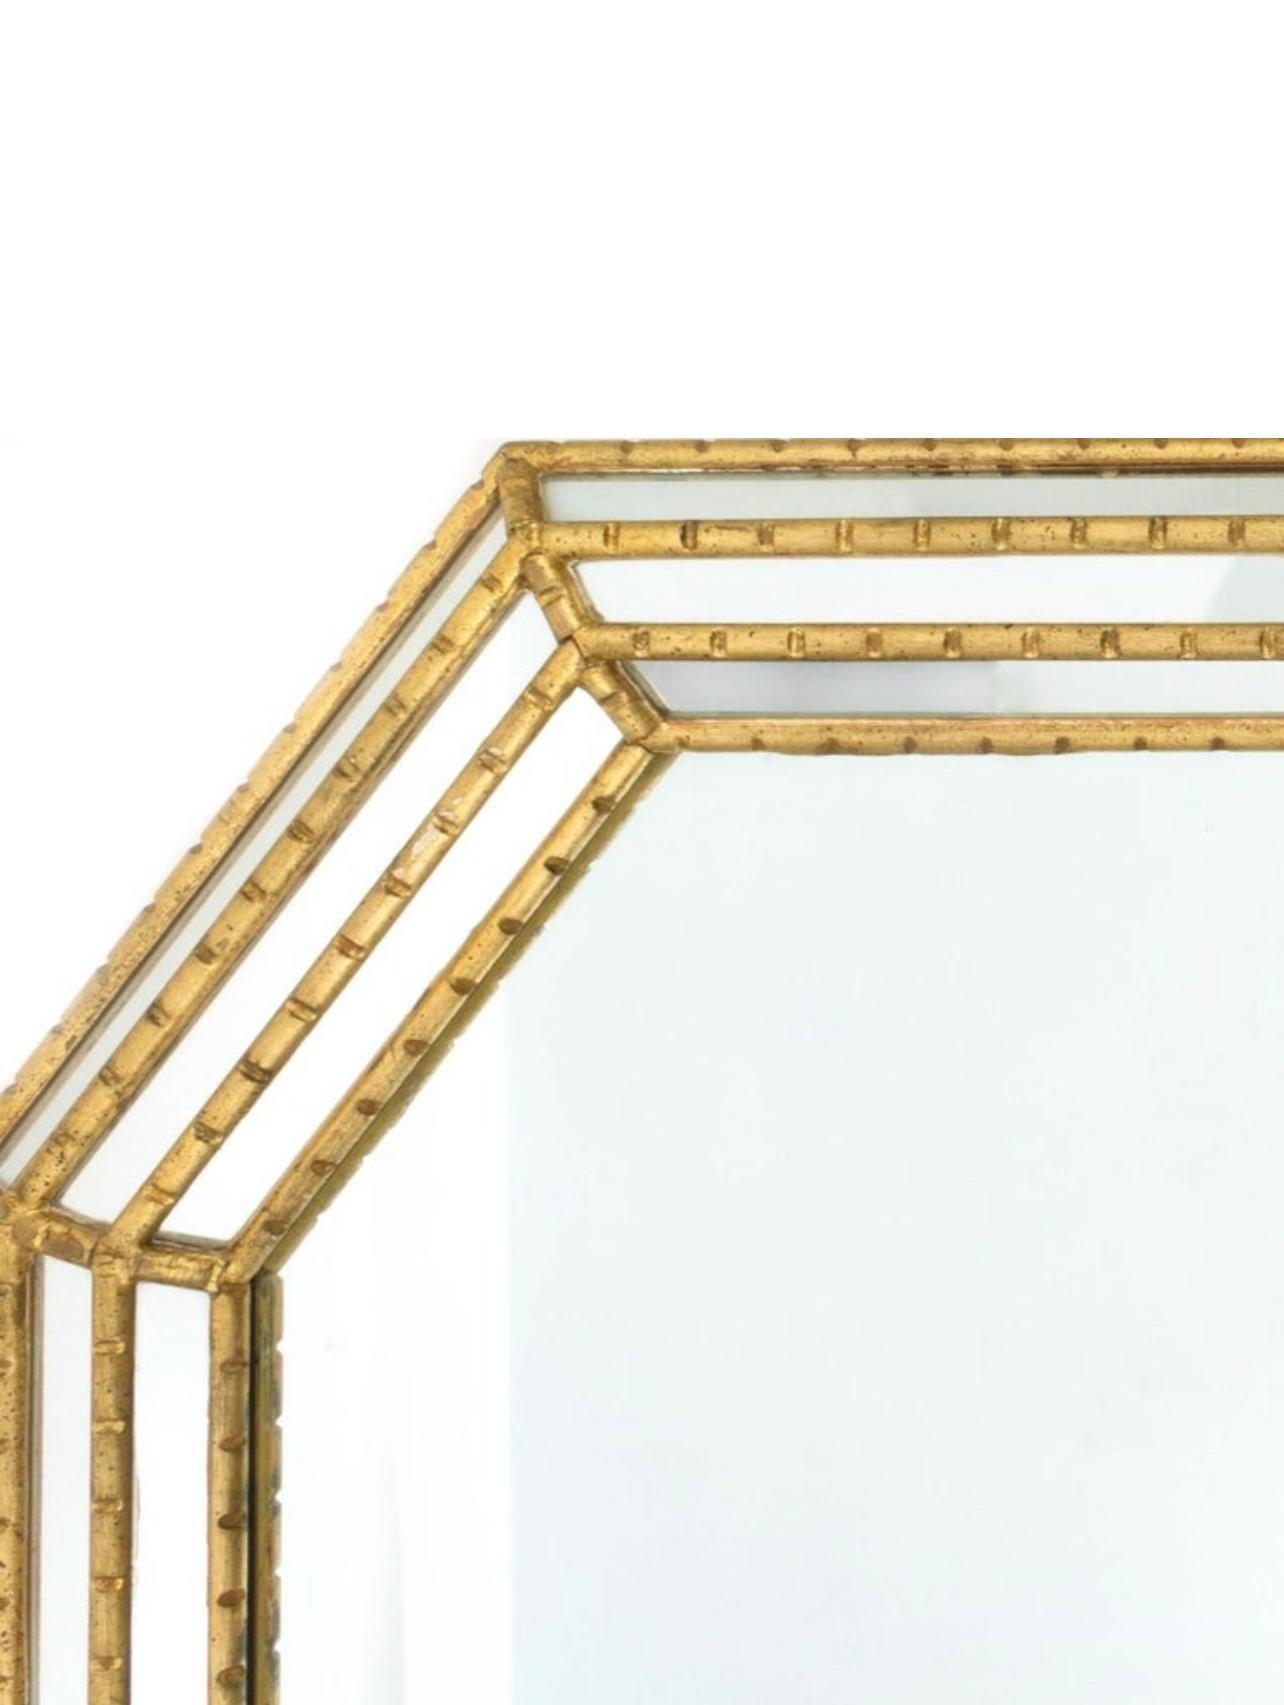 Gold octagon framed mirror with faux bamboo frame and inset mirrored panels by Labarge. 

USA, circa 1980.

Dimensions: 42 inches H × W 31.5 inches W.